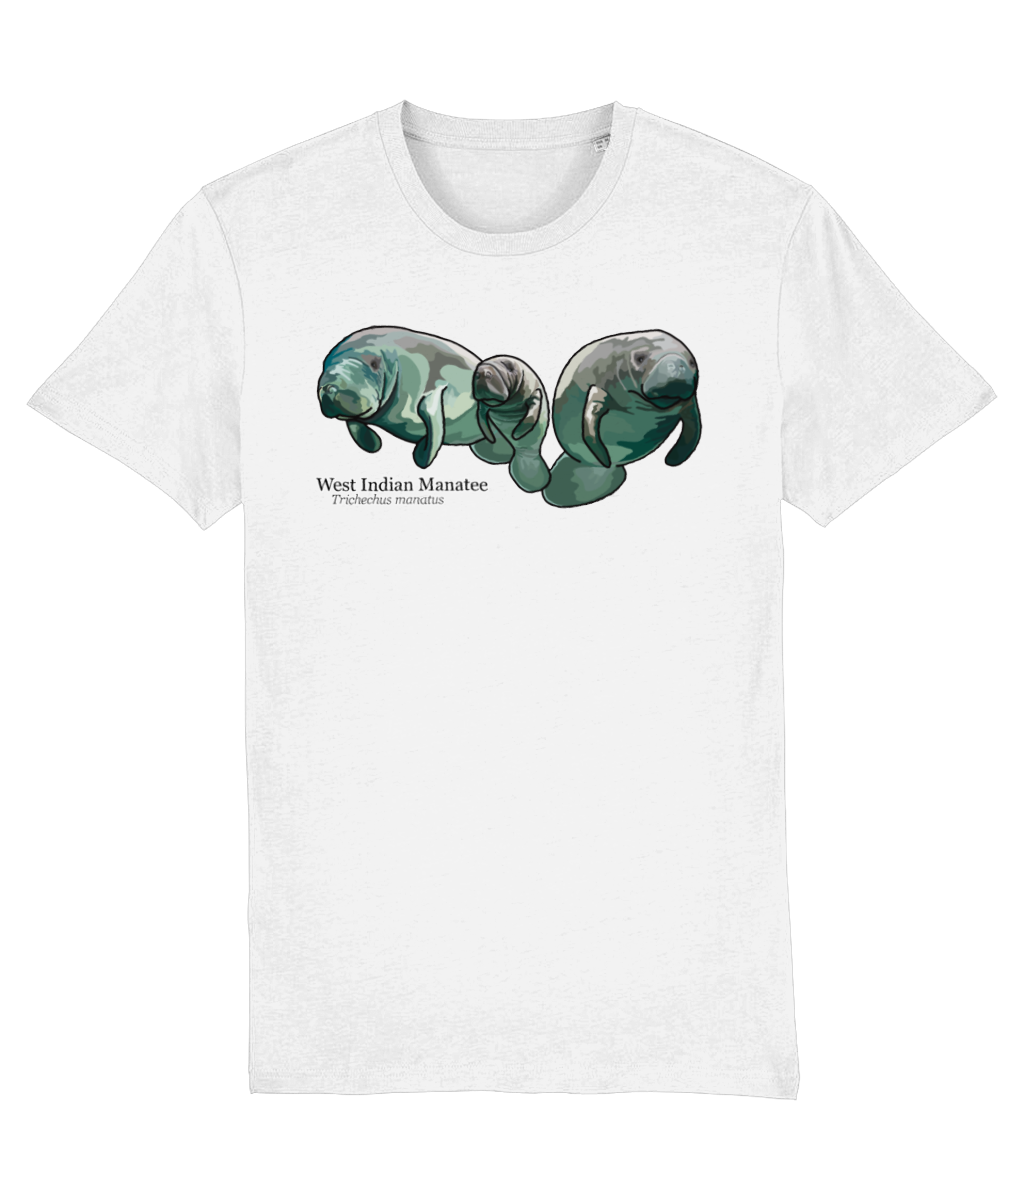 West Indian Manatee Charity T-Shirt